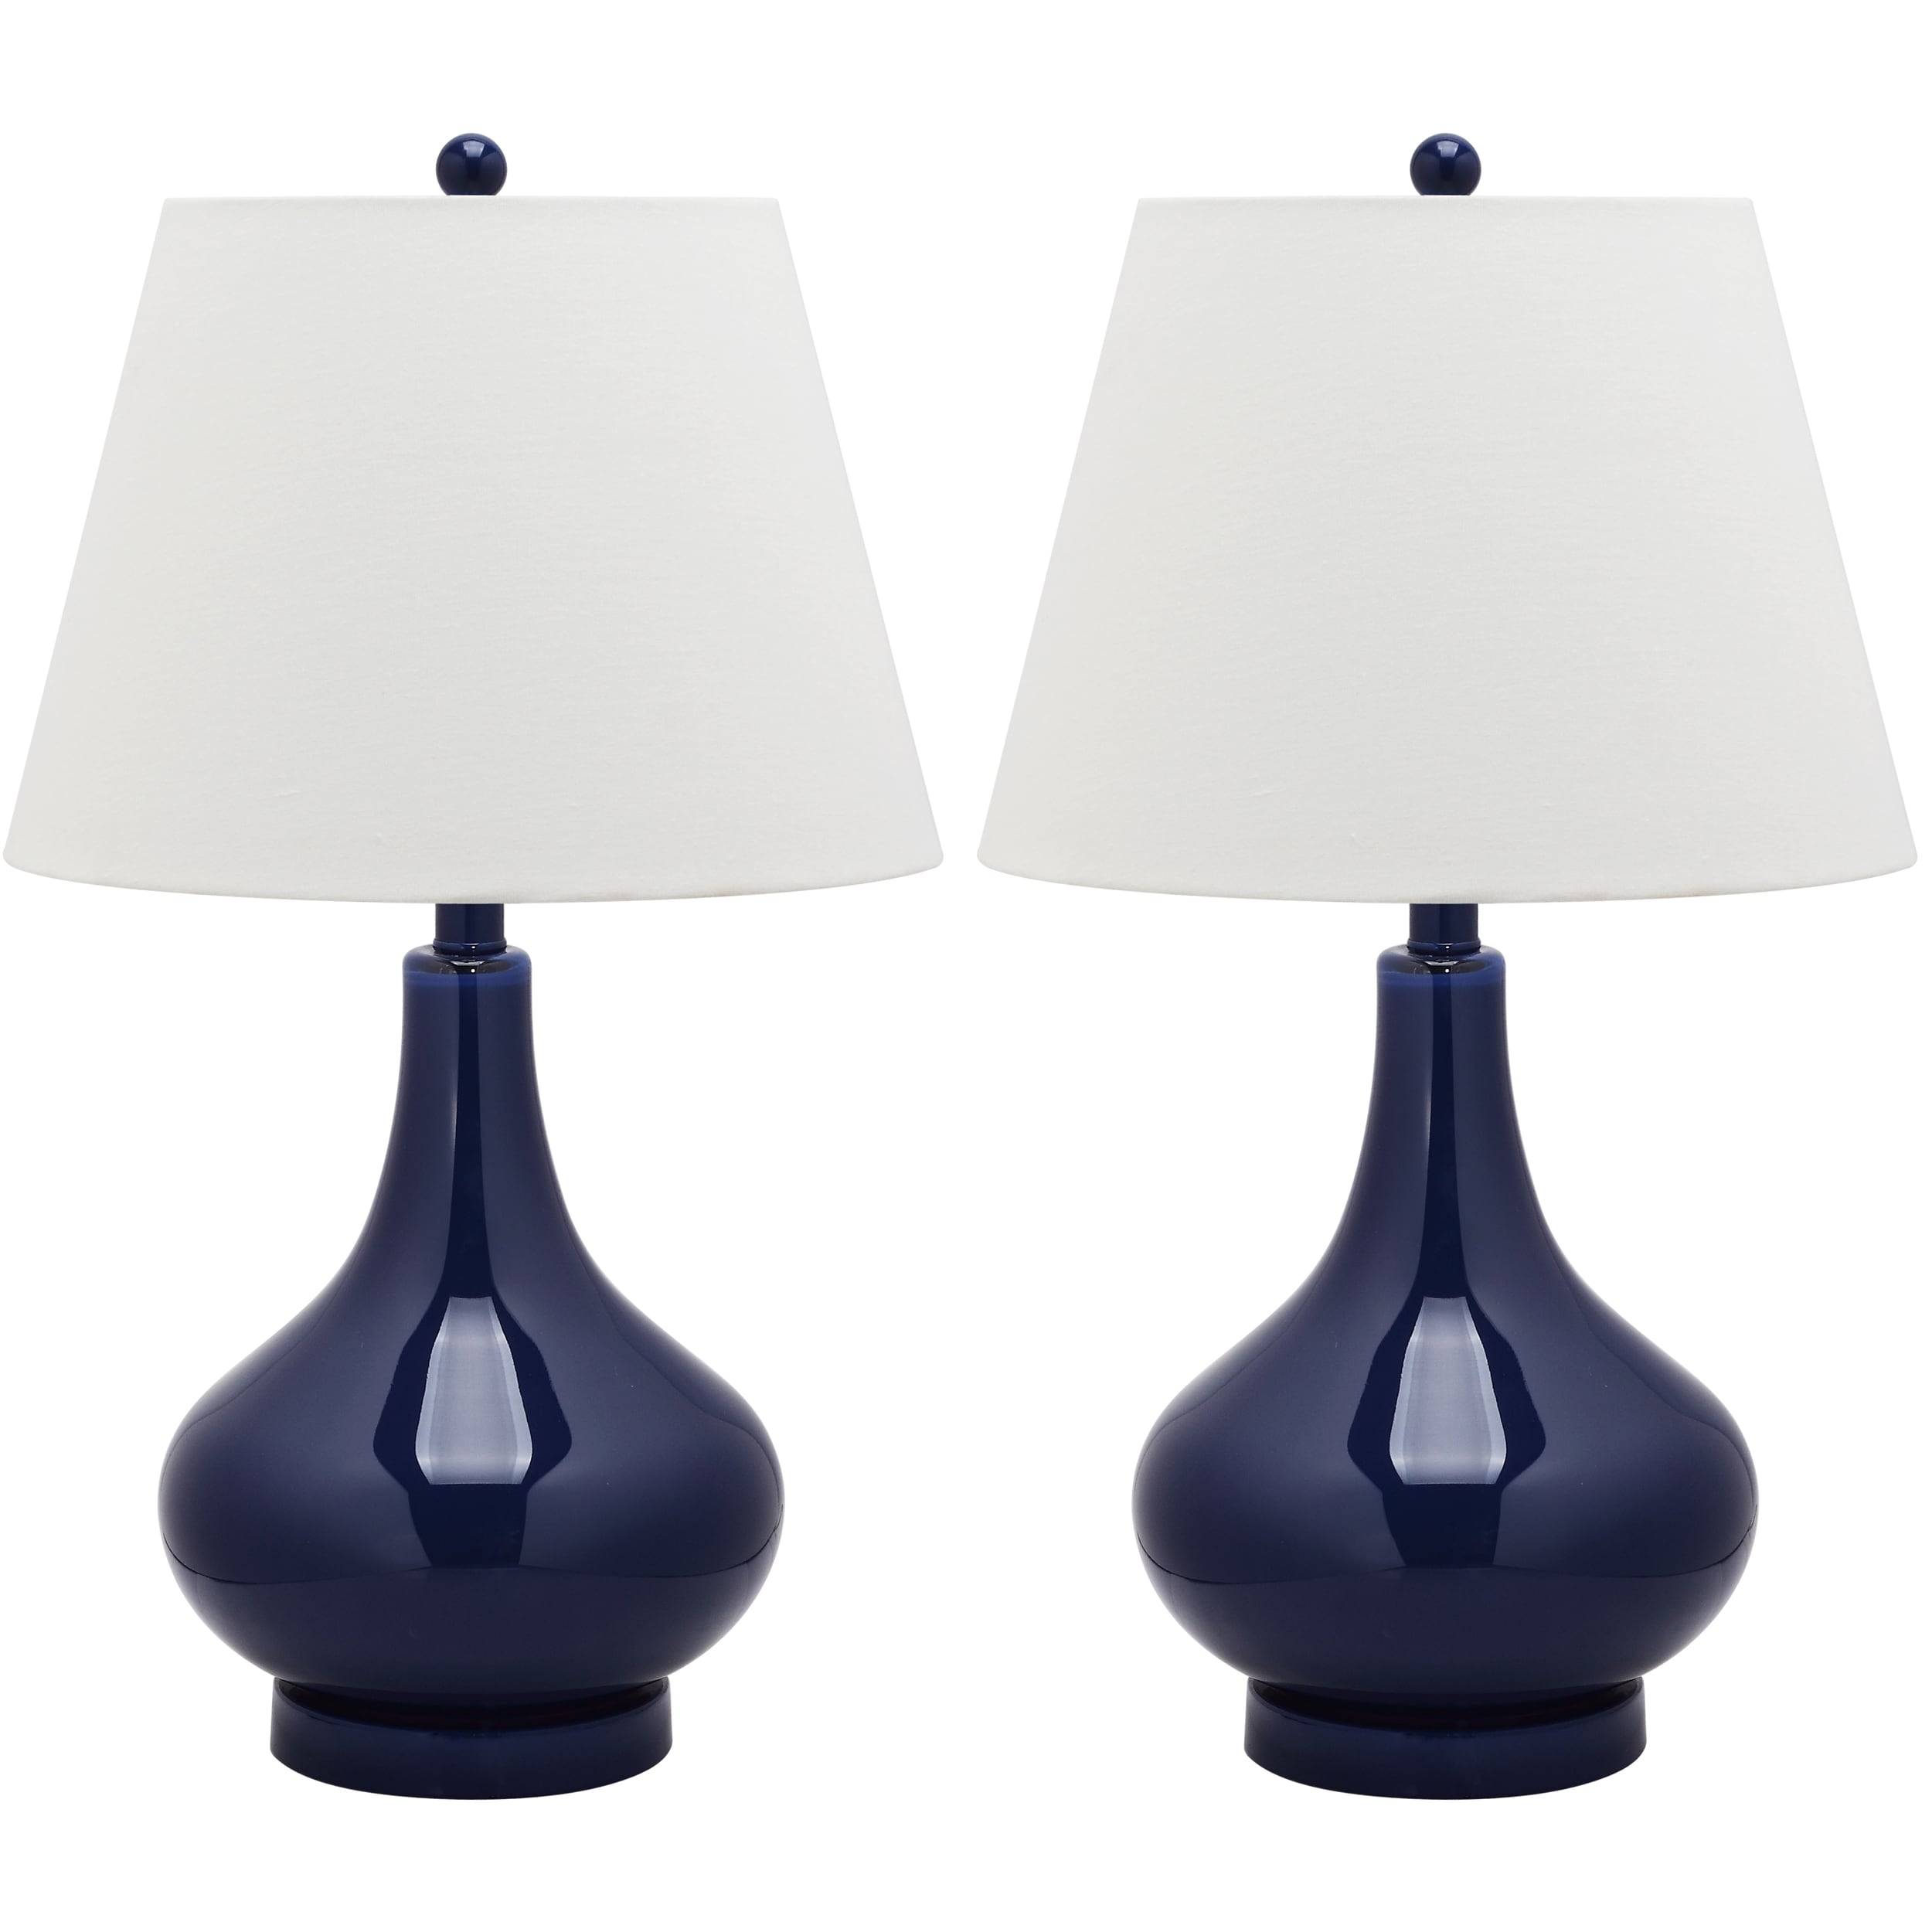 Amy Gourd Glass 1 light Navy Table Lamps (Set of 2) Today $189.99